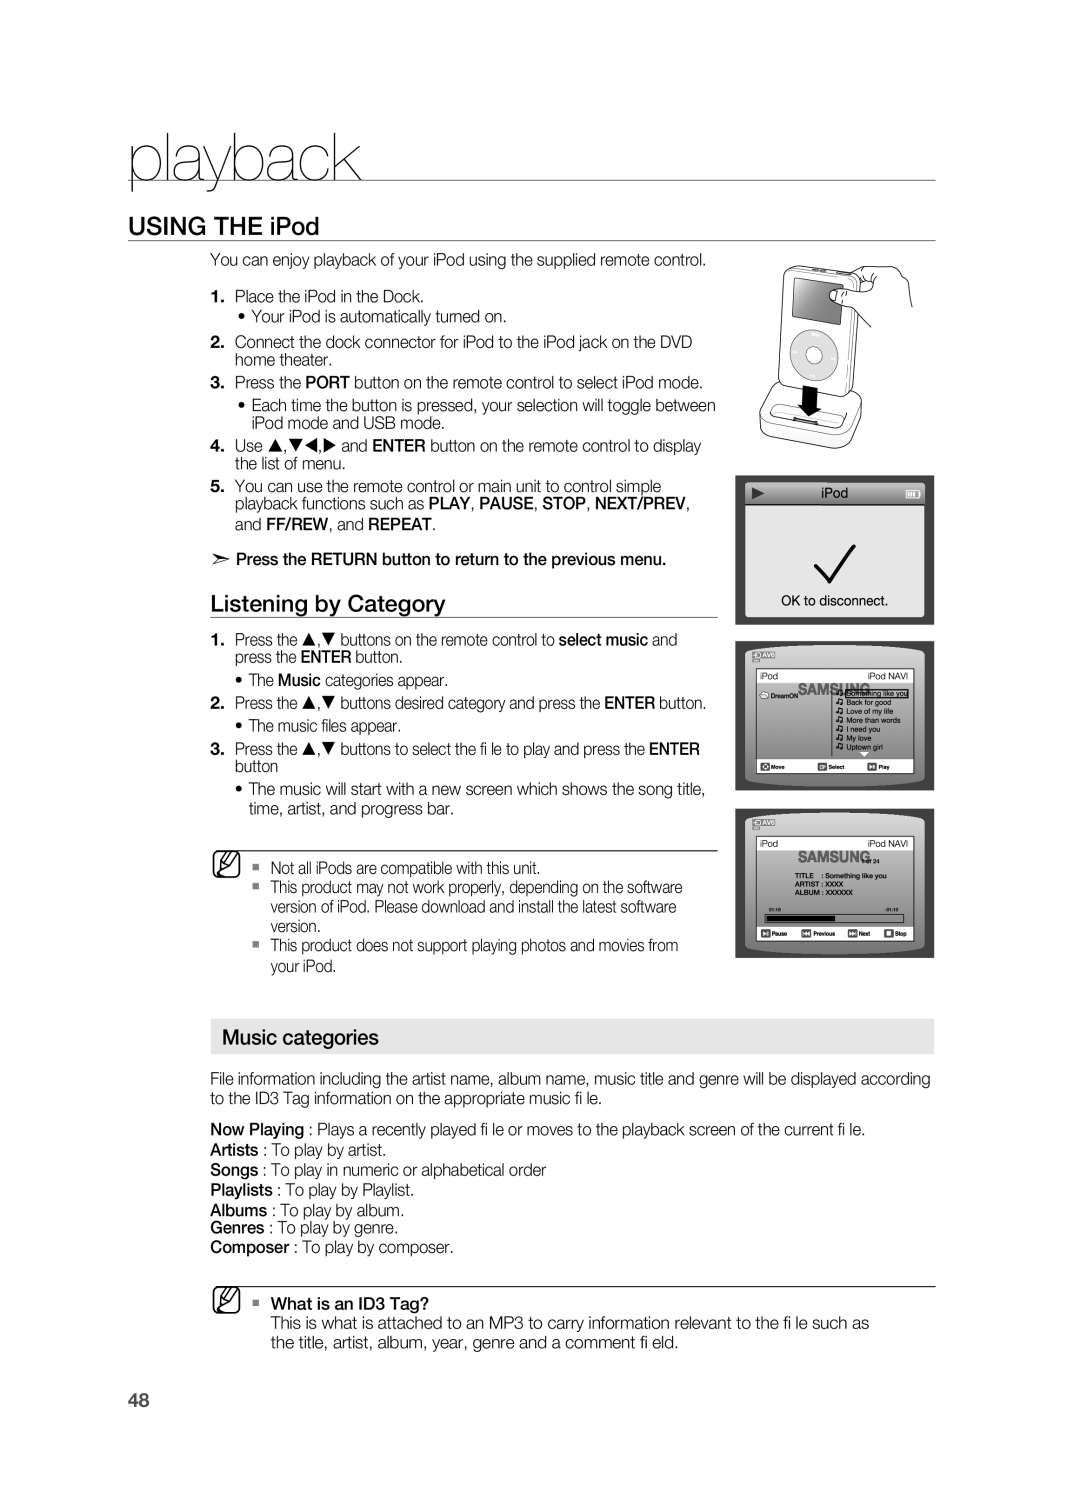 Samsung HT-TWZ315 manual USinG tHE iPod, Listening by Category, music categories, playback 